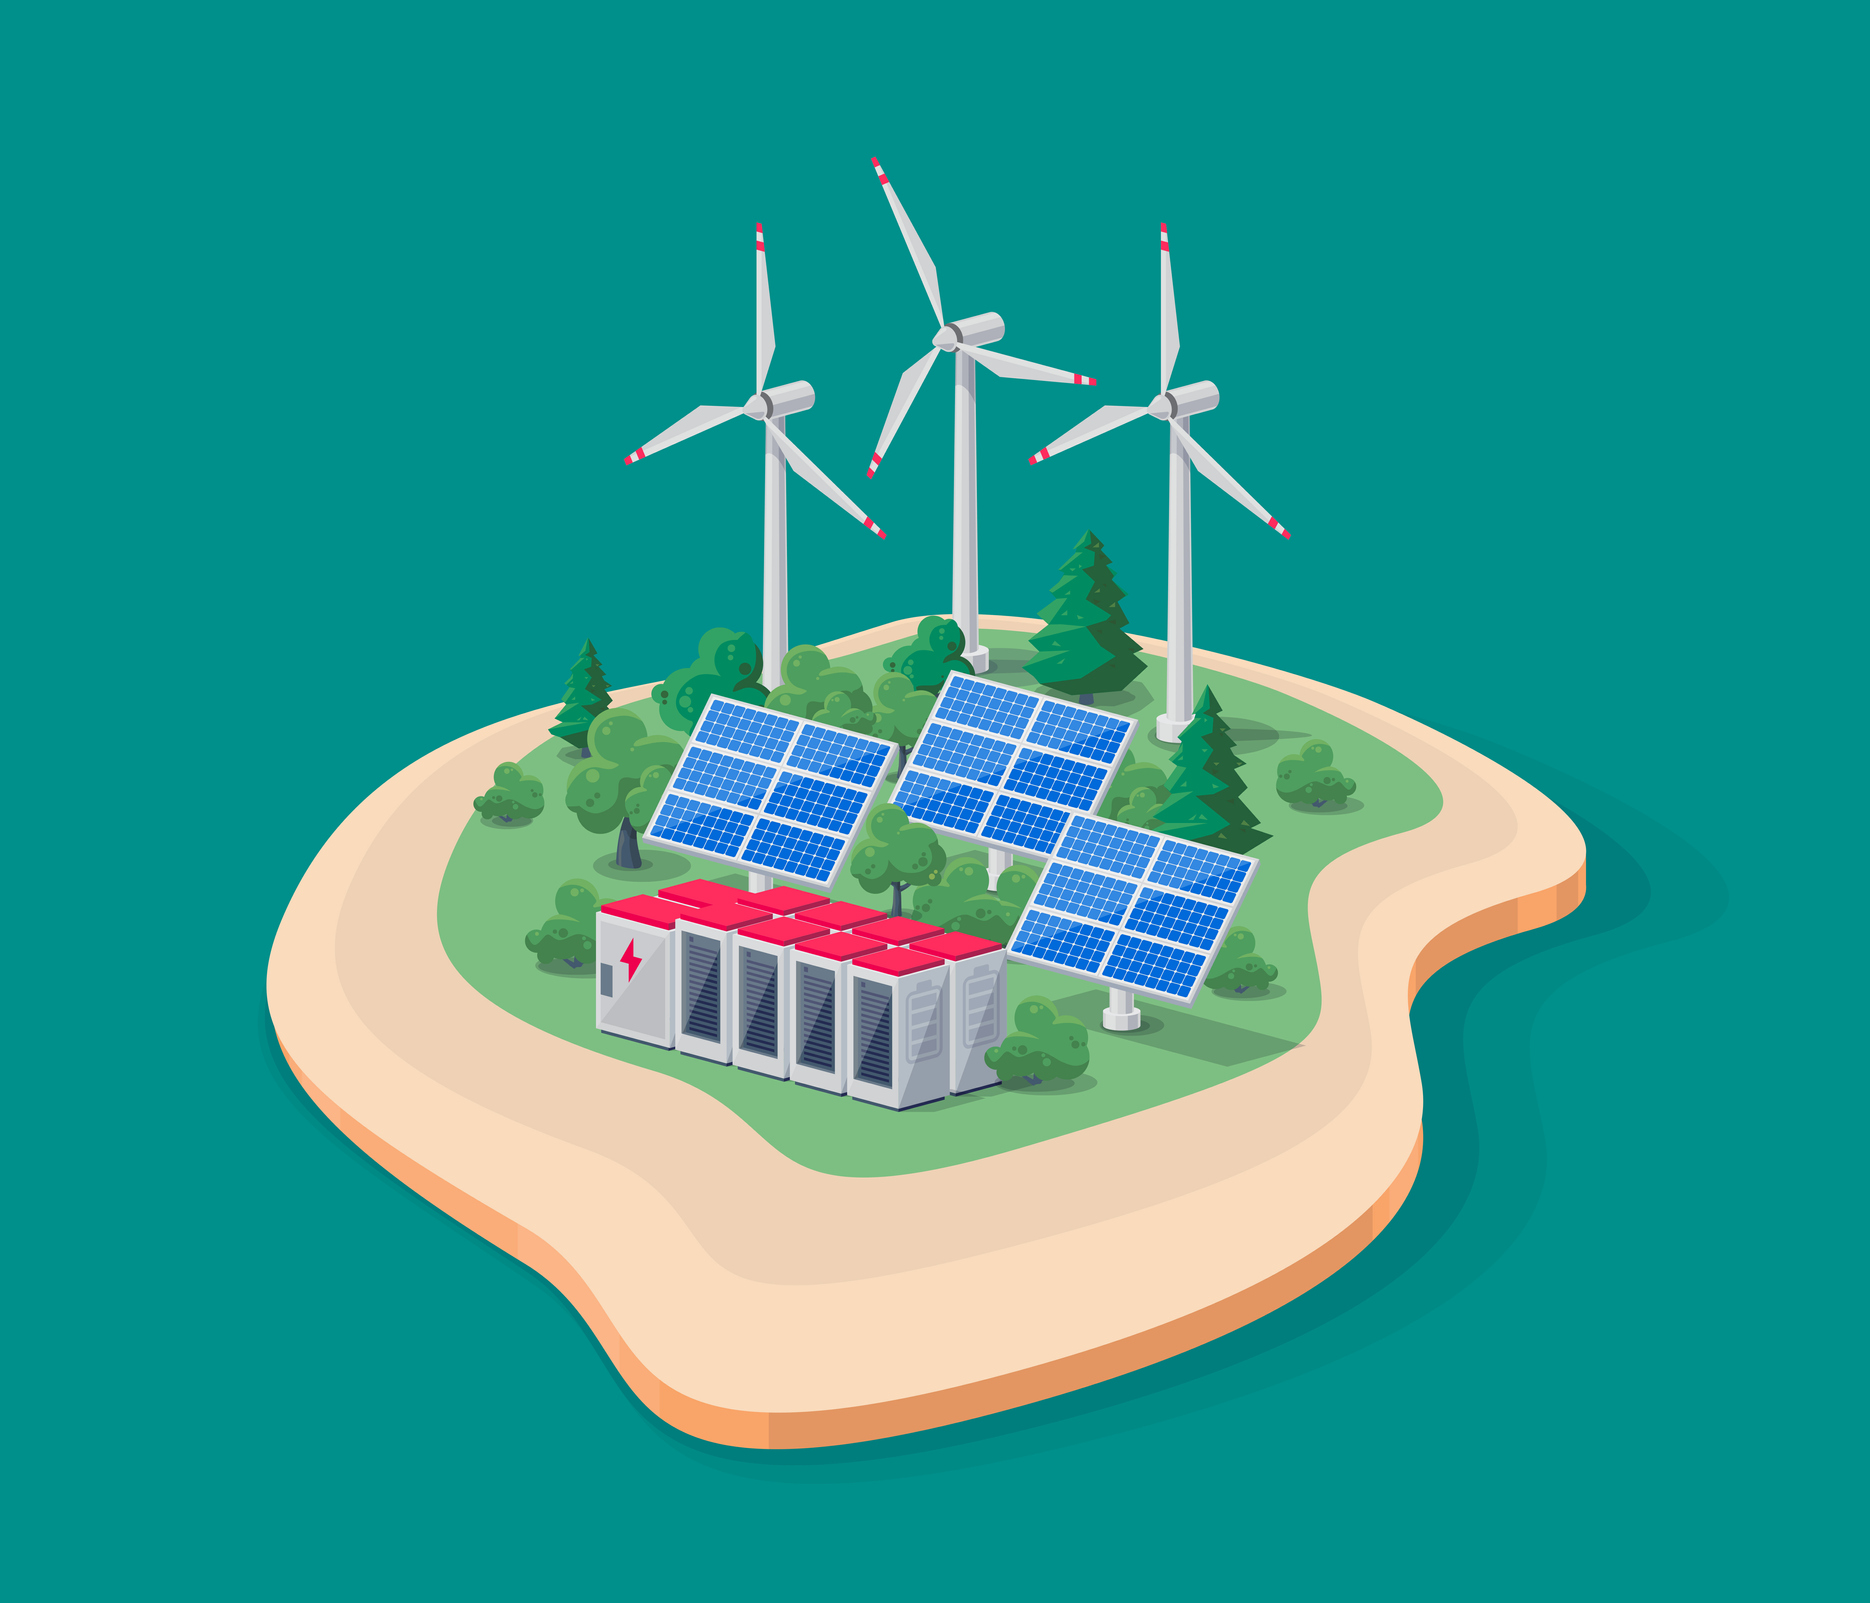 Microgrid Getty Images